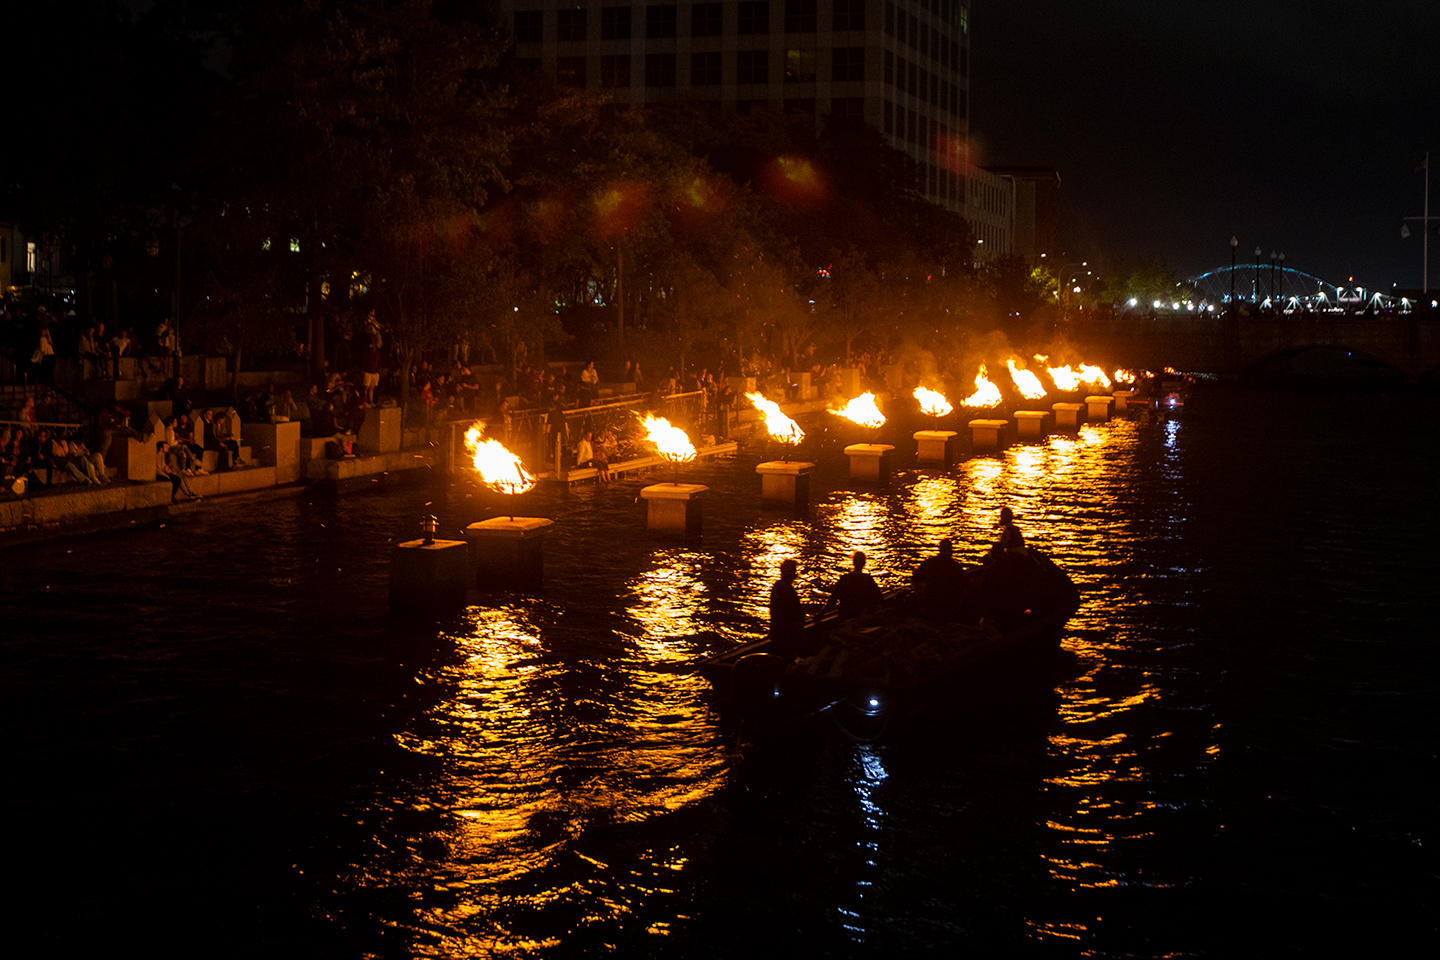 a boat approaching the waterfire floating fire pits